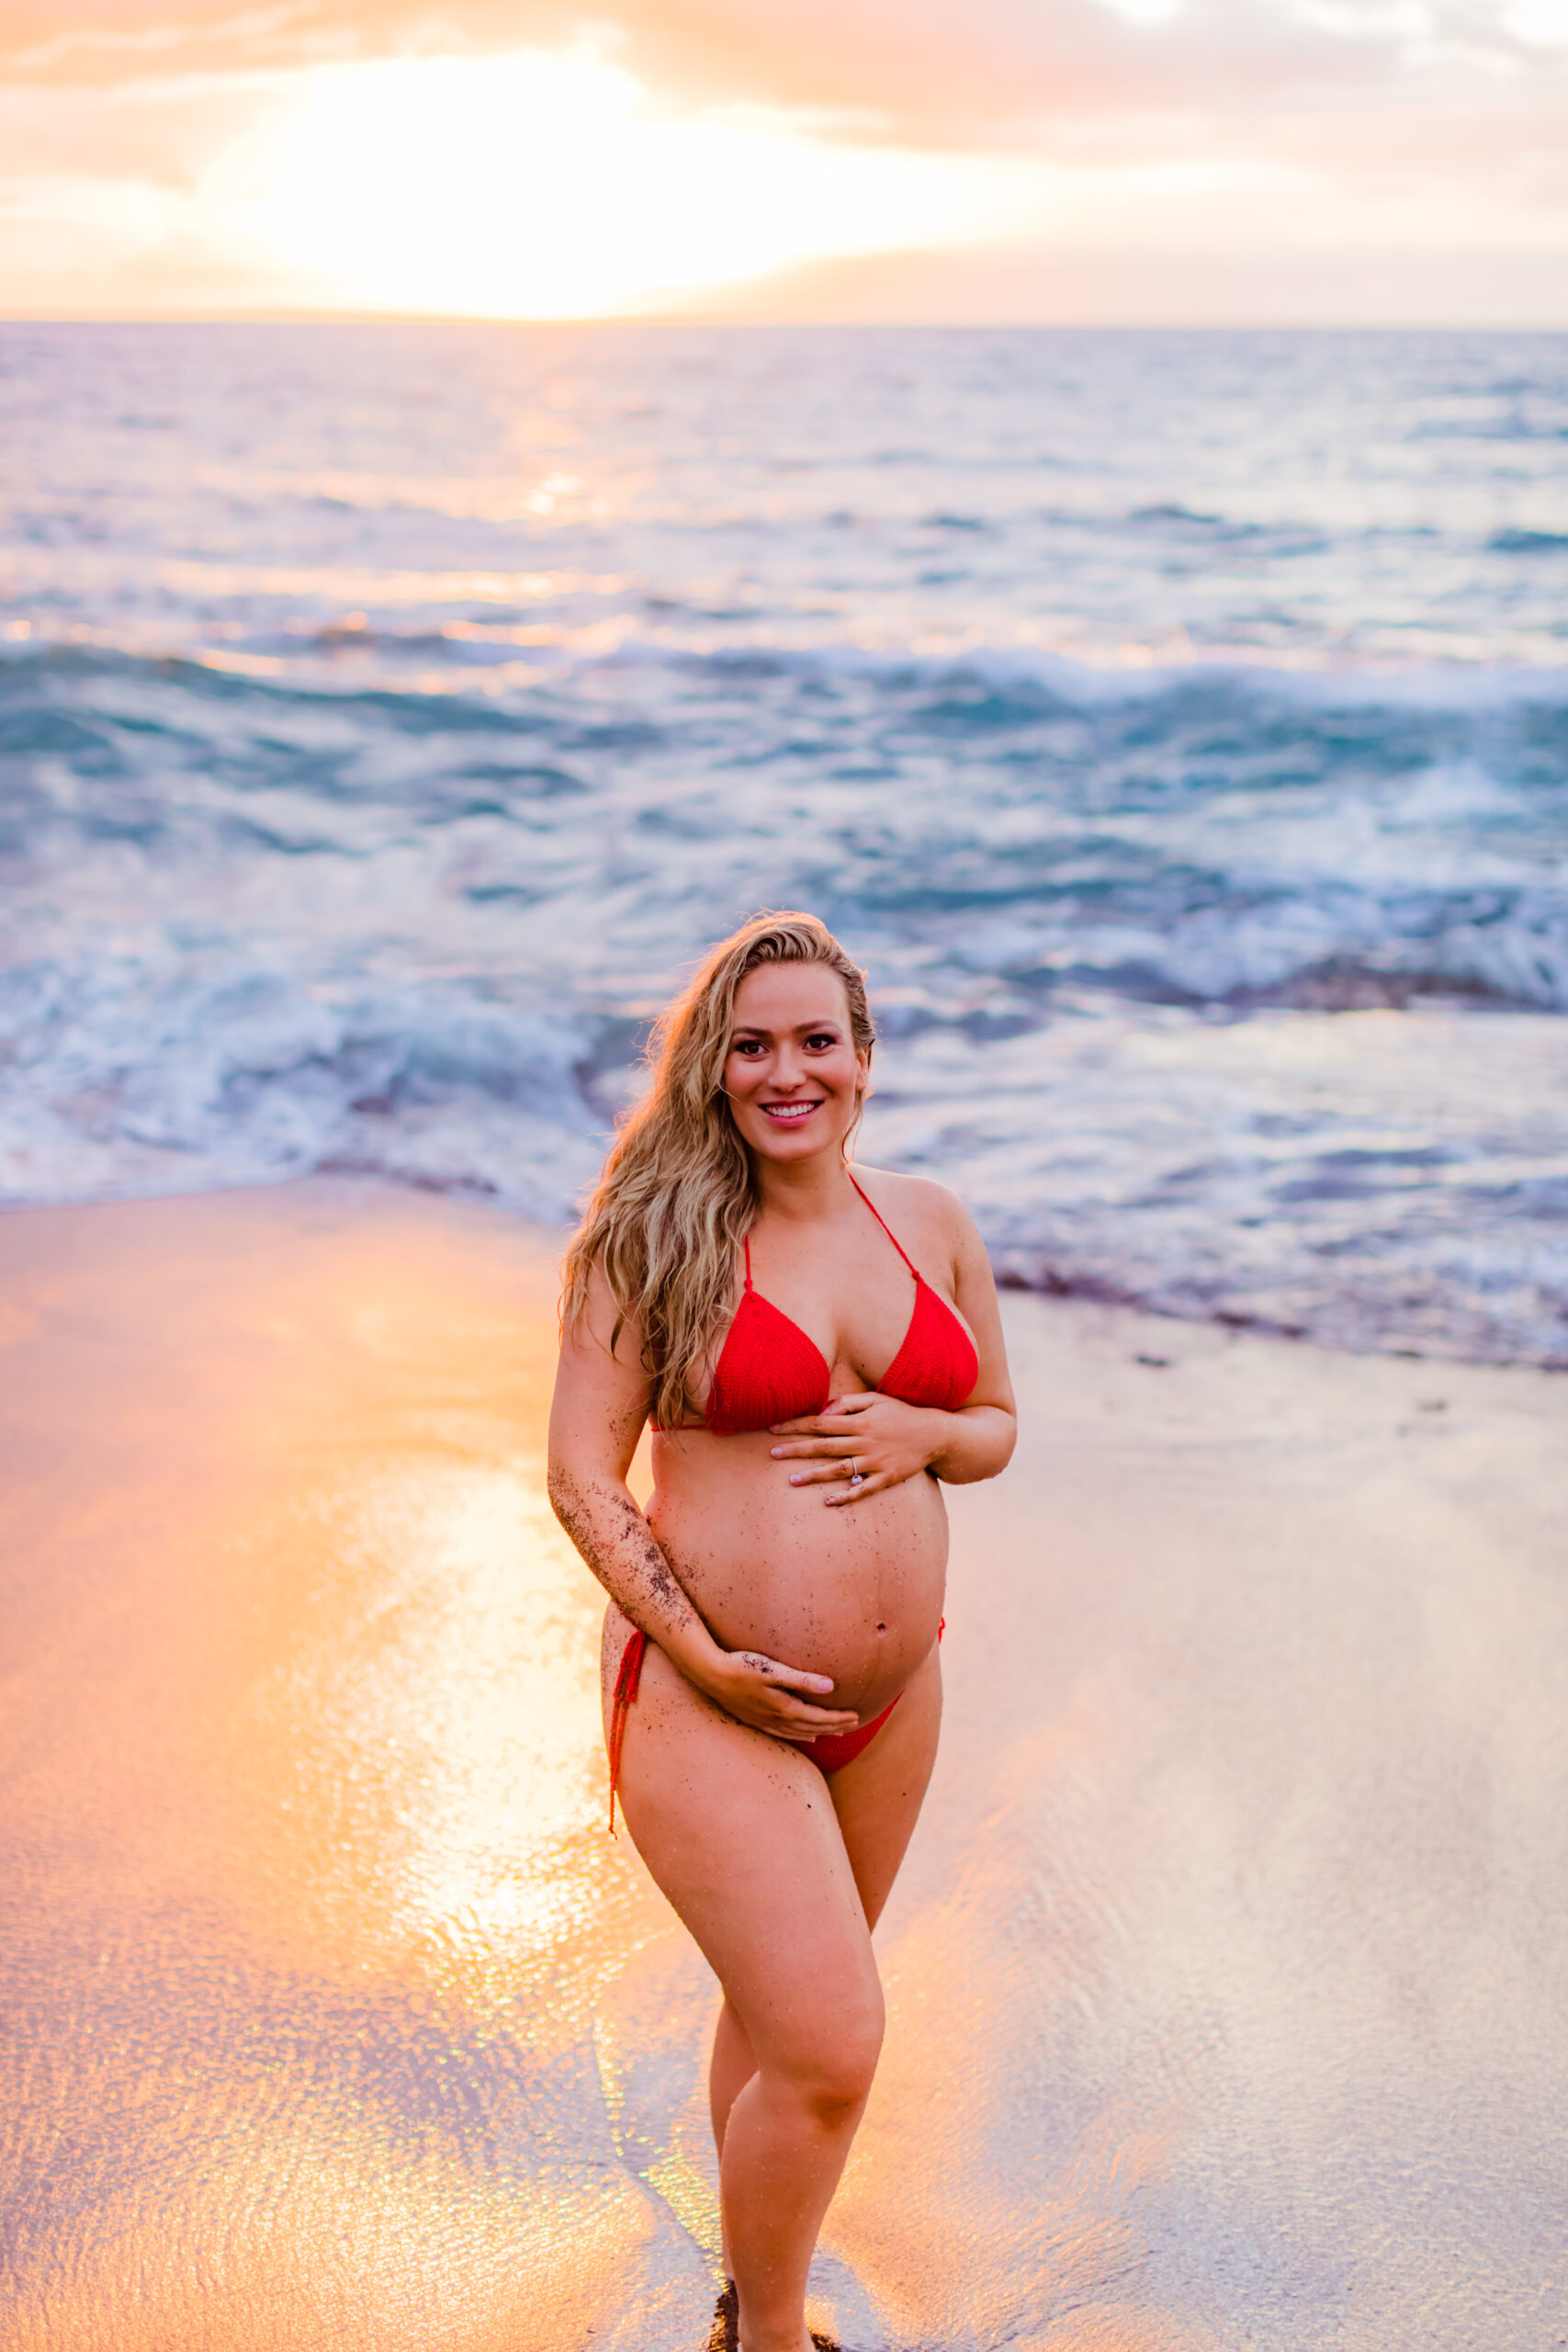 Woman smiles as she poses for her pregnancy photos in Maui during her sunset photoshoot